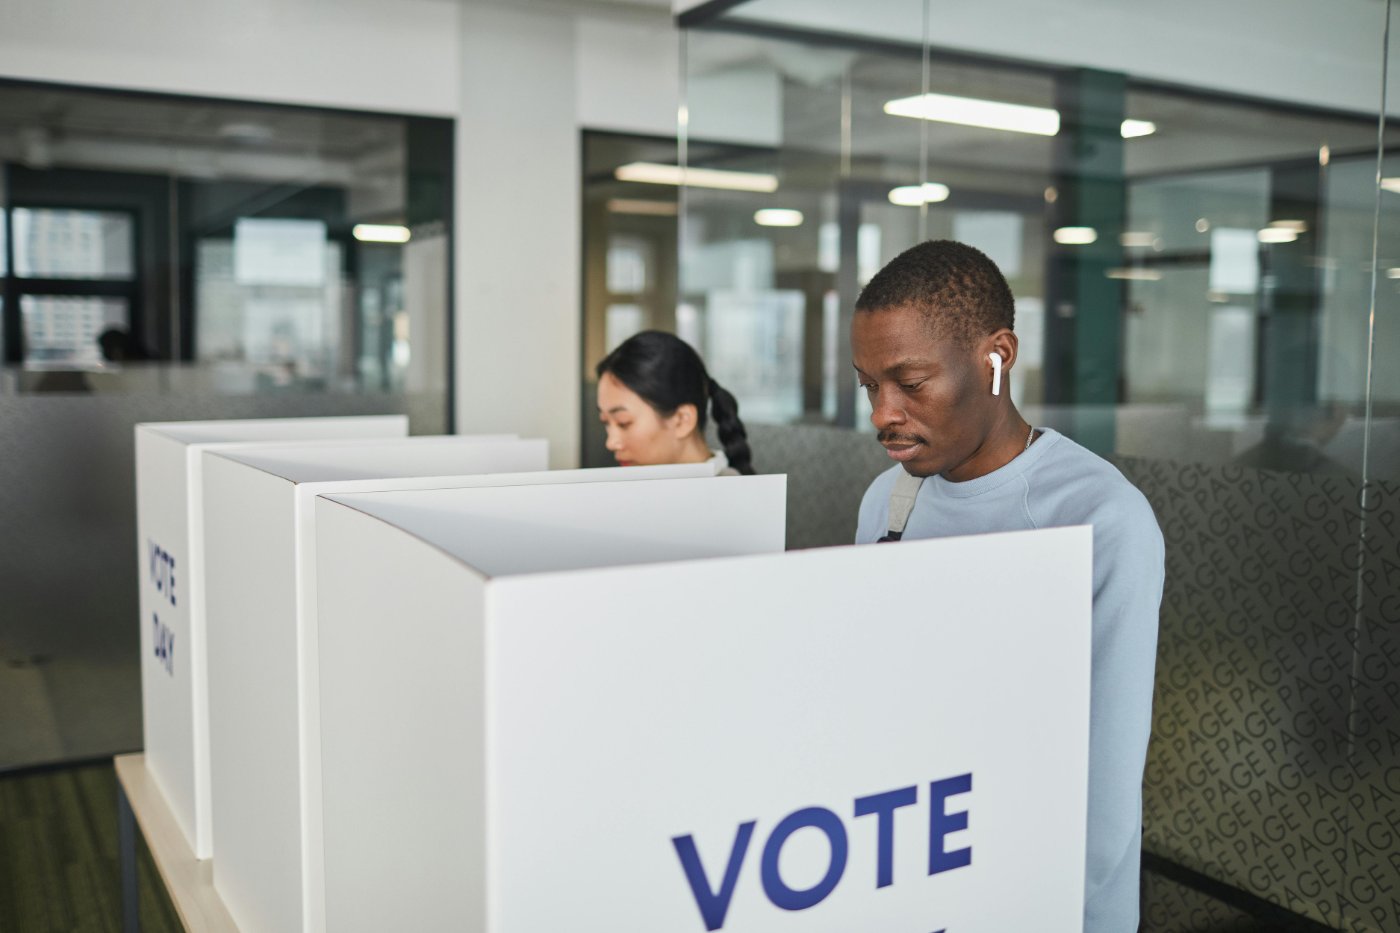 Two people vote at a polling station